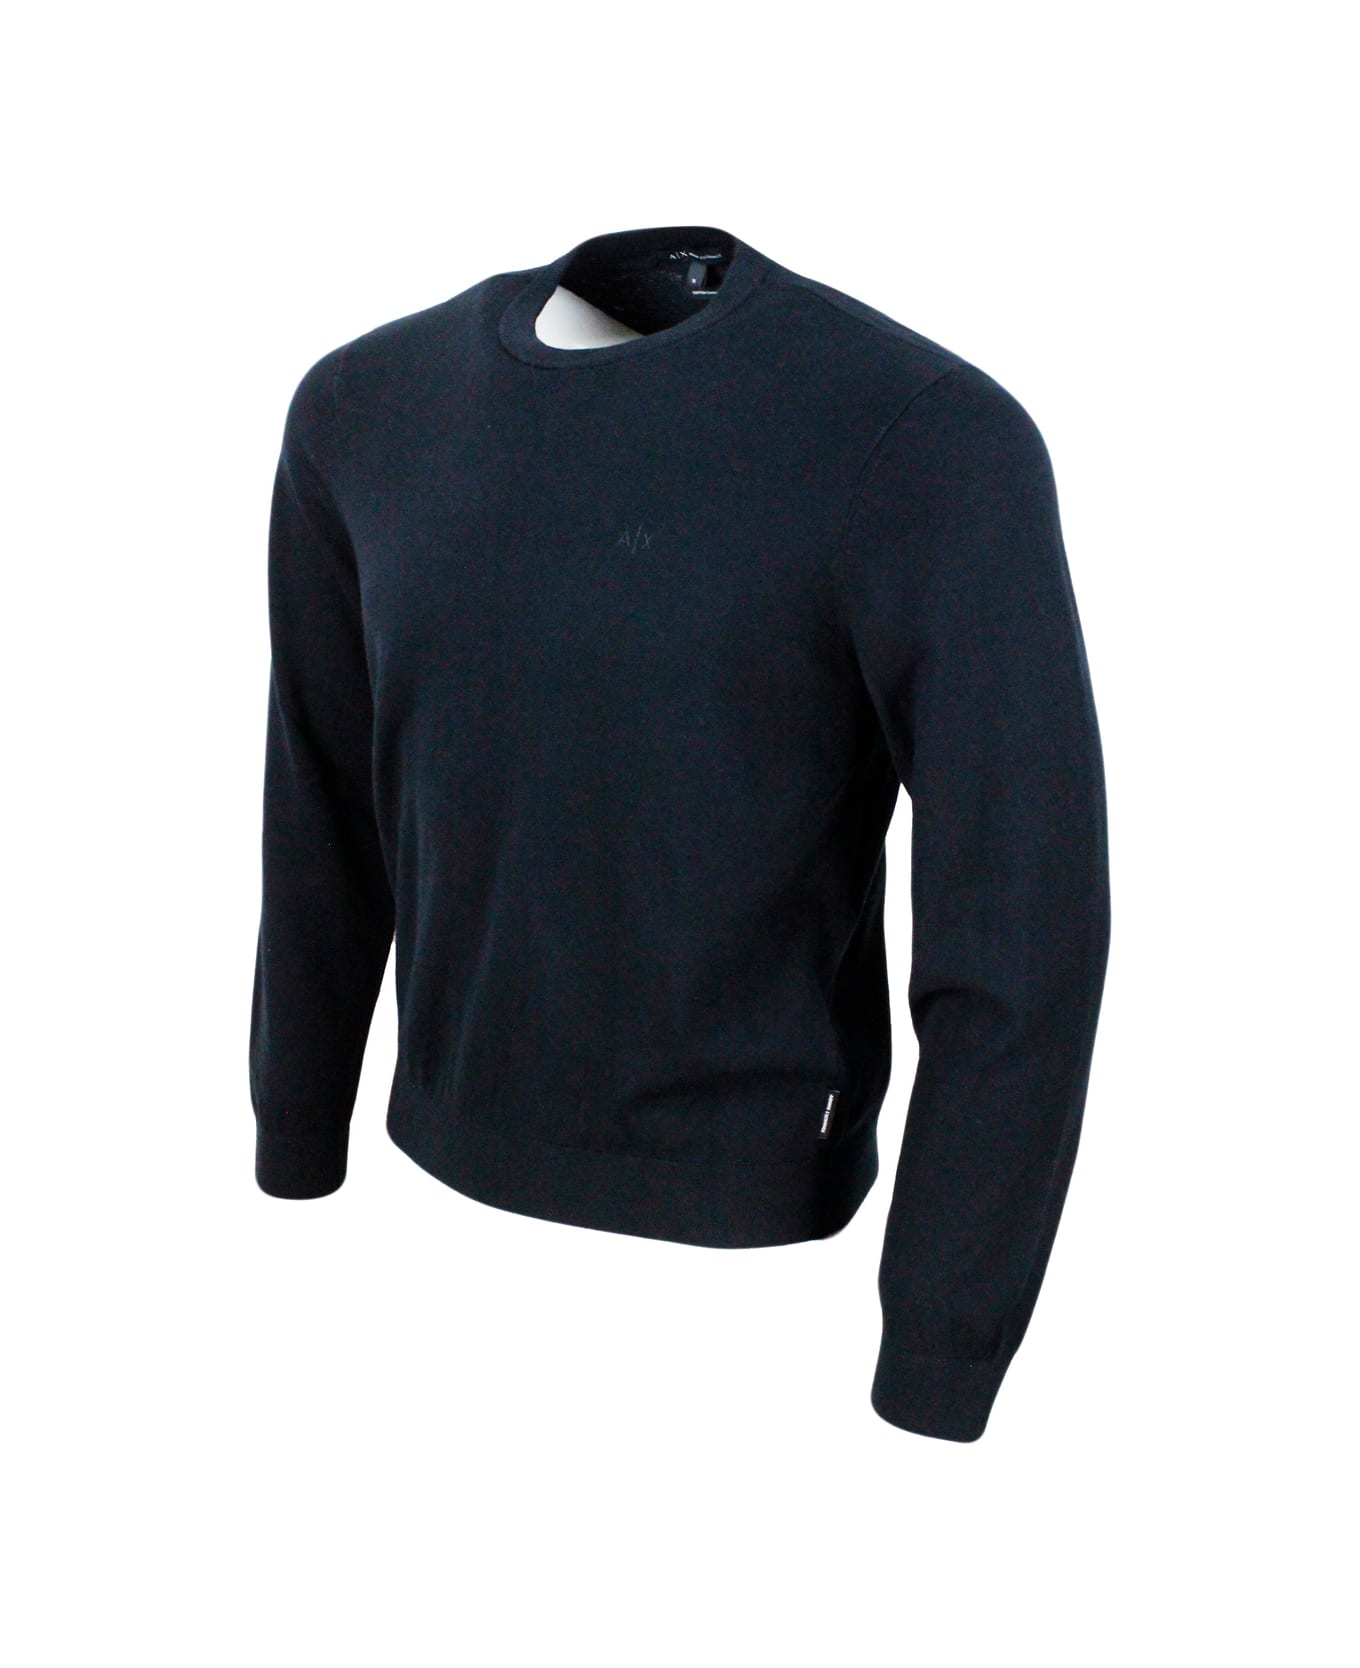 Armani Collezioni Lightweight Long-sleeved Crew-neck Sweater Made Of Warm Cotton And Cashmere With Contrasting Color Profiles At The Bottom And On The Cuffs - Black